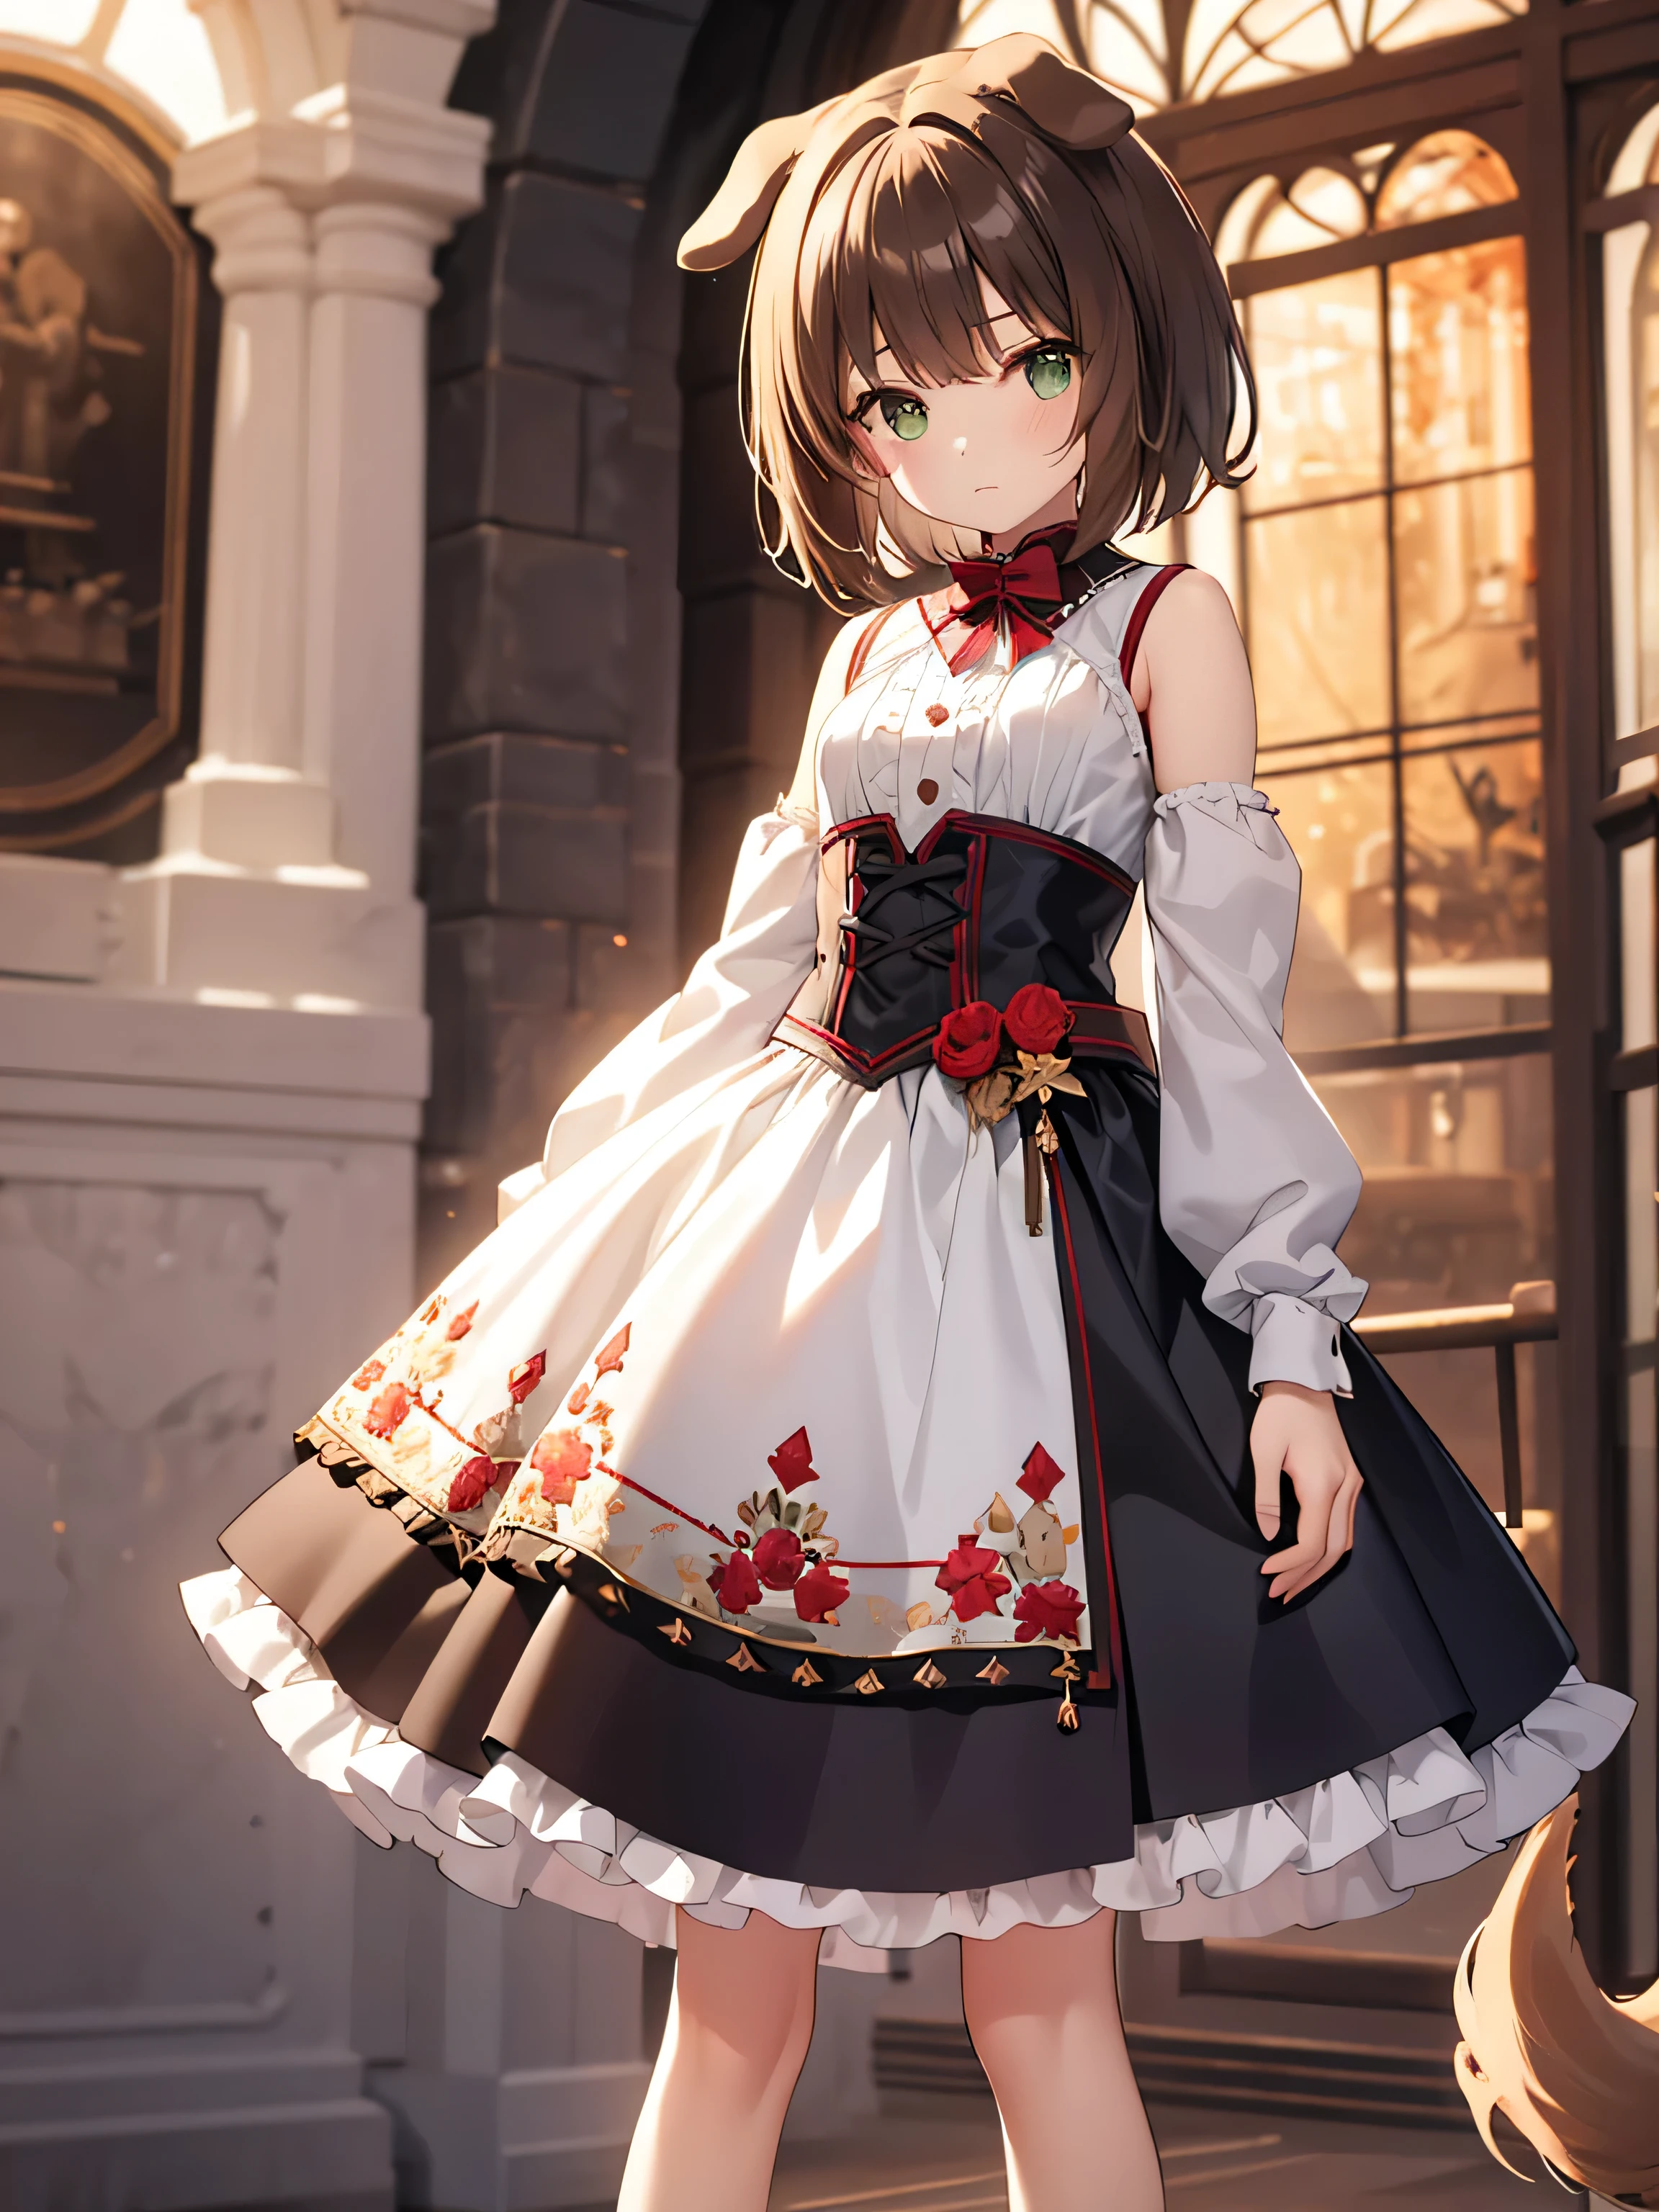 10-year-old girl, one person, Green Eyes, Brown Hair, Dog ears, Dog tail, Short Bob Hair, Small breasts,red and white gothic lolita, mini skirt, Short stature, Expressionless, 32K image quality, Ancient battlefield, Clothes with very detailed embroidery,